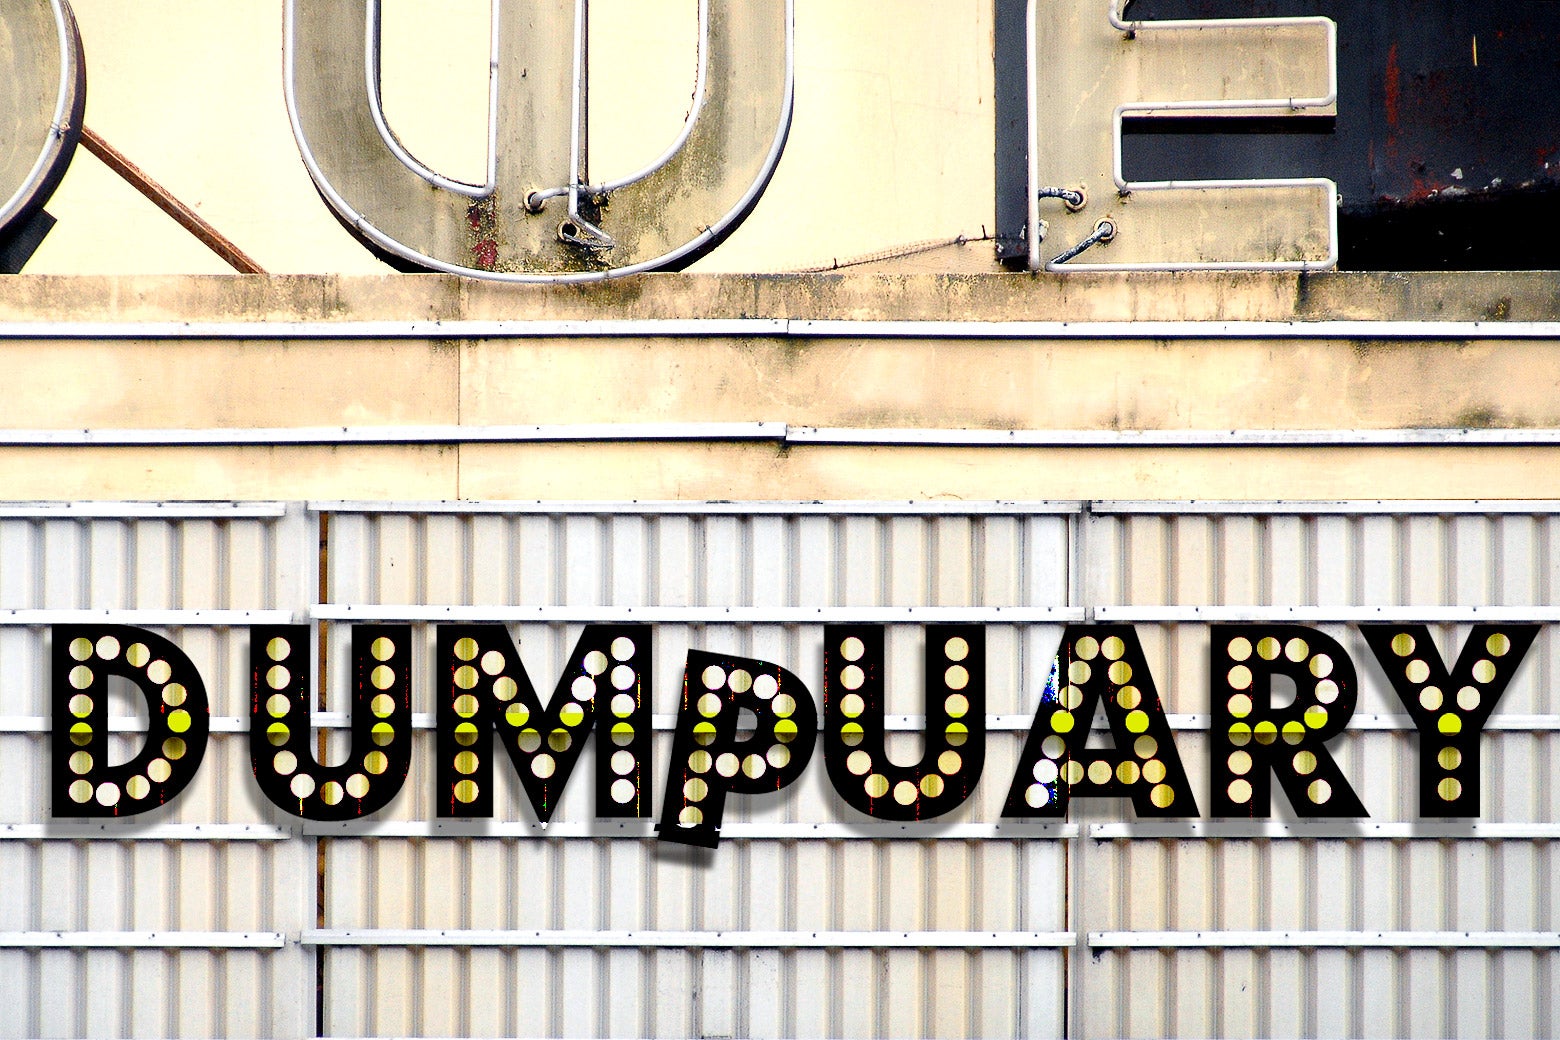 A decrepit movie marquee with the word "DUMPUARY" plastered on it.